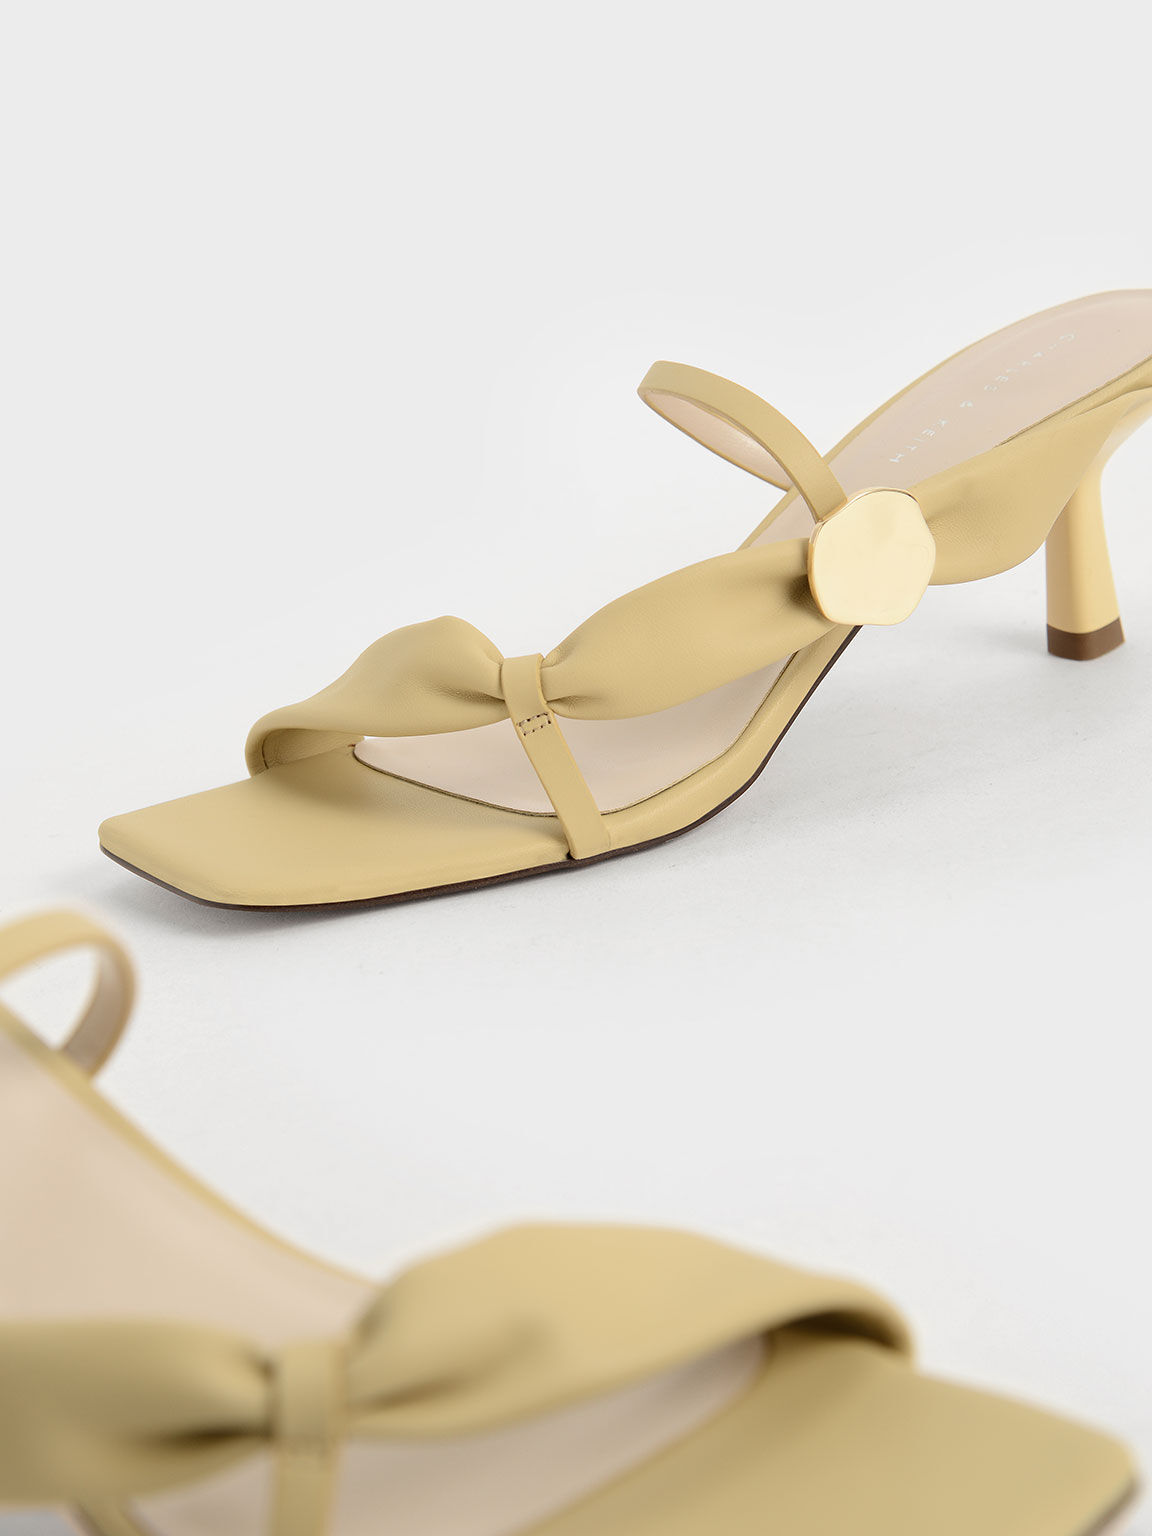 Sandal Mules Embellished Puffy Strap, Yellow, hi-res